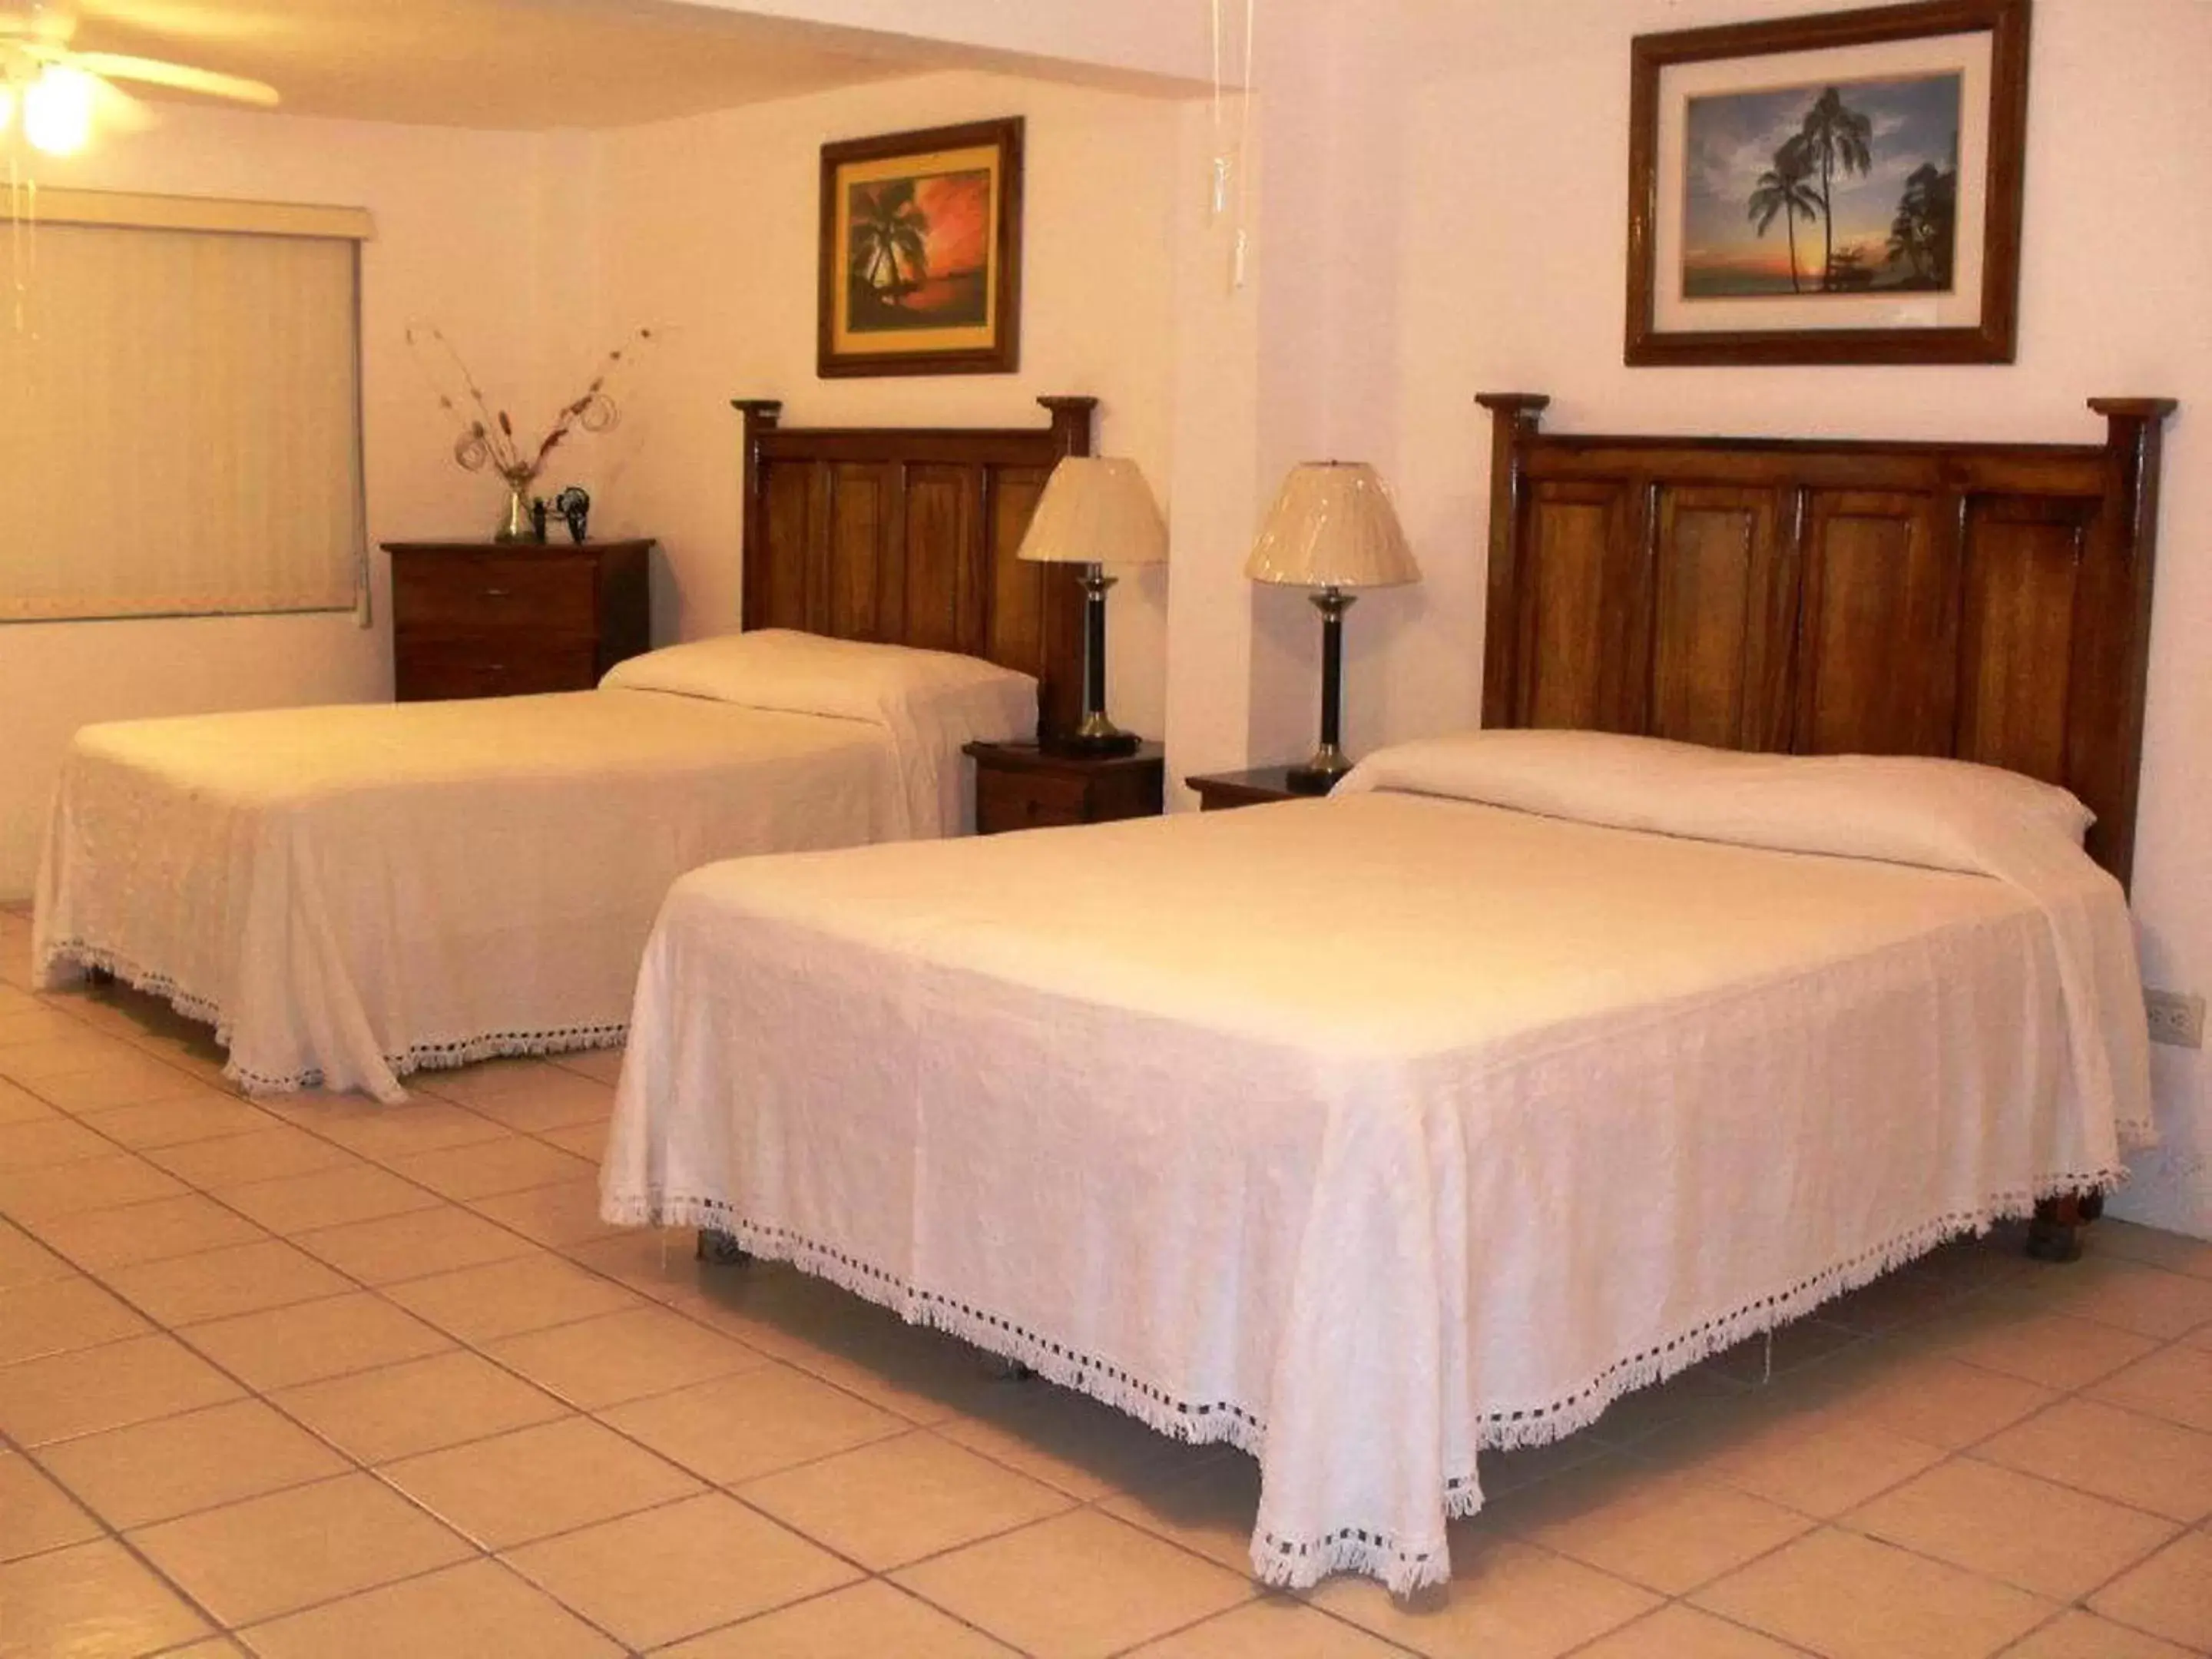 Bed in Freedom Shores "La Gringa" Hotel - Universally Designed